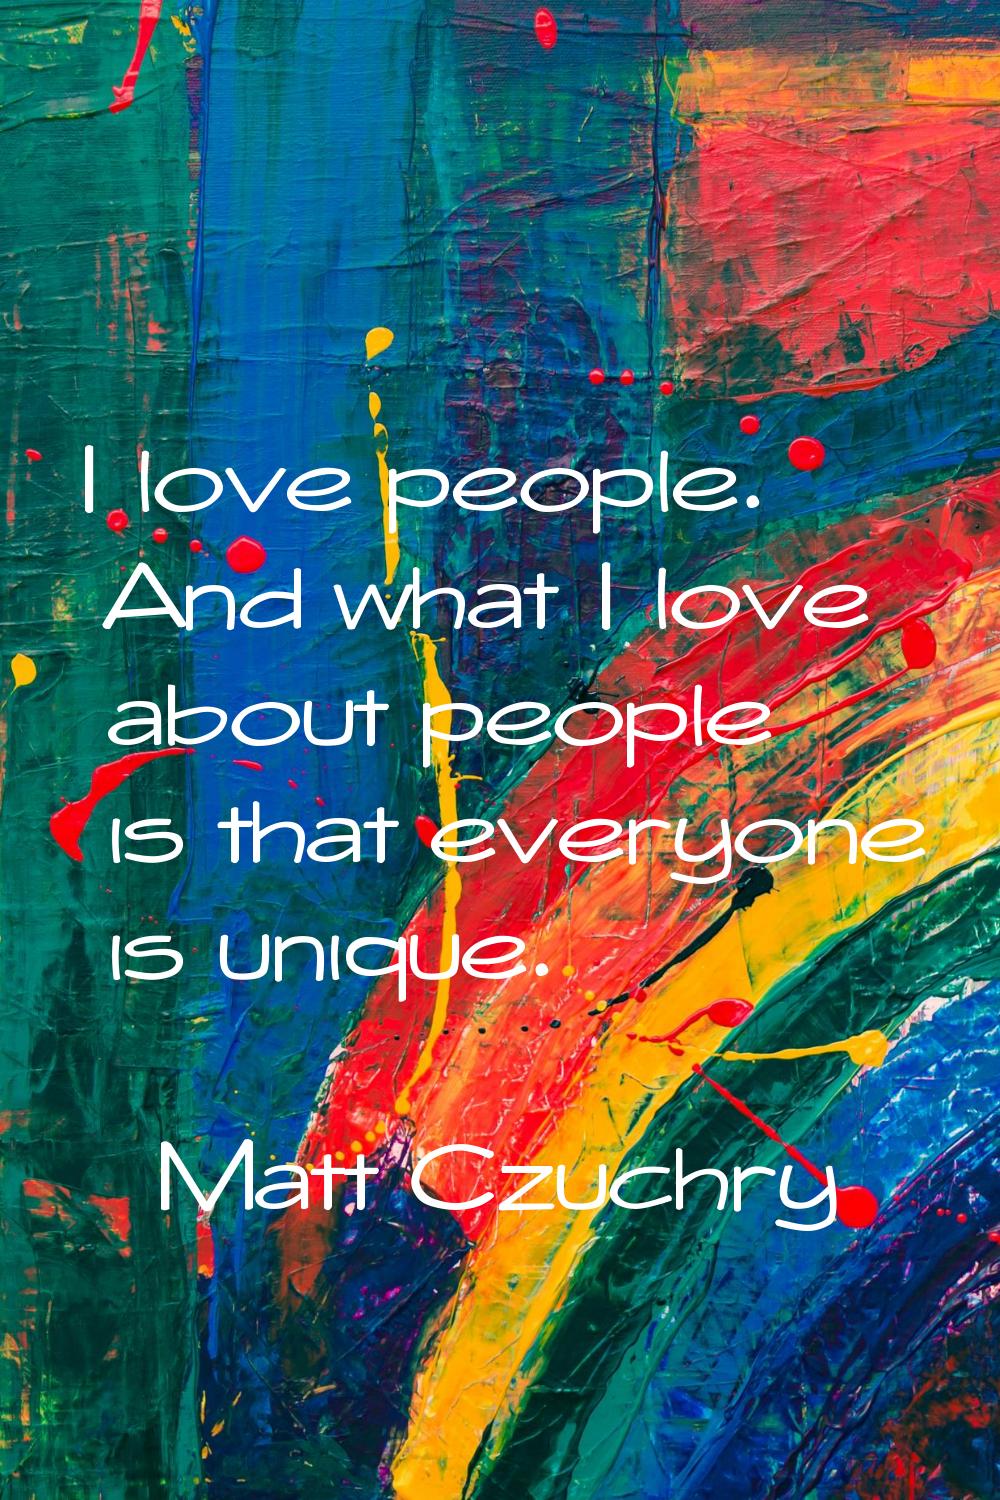 I love people. And what I love about people is that everyone is unique.